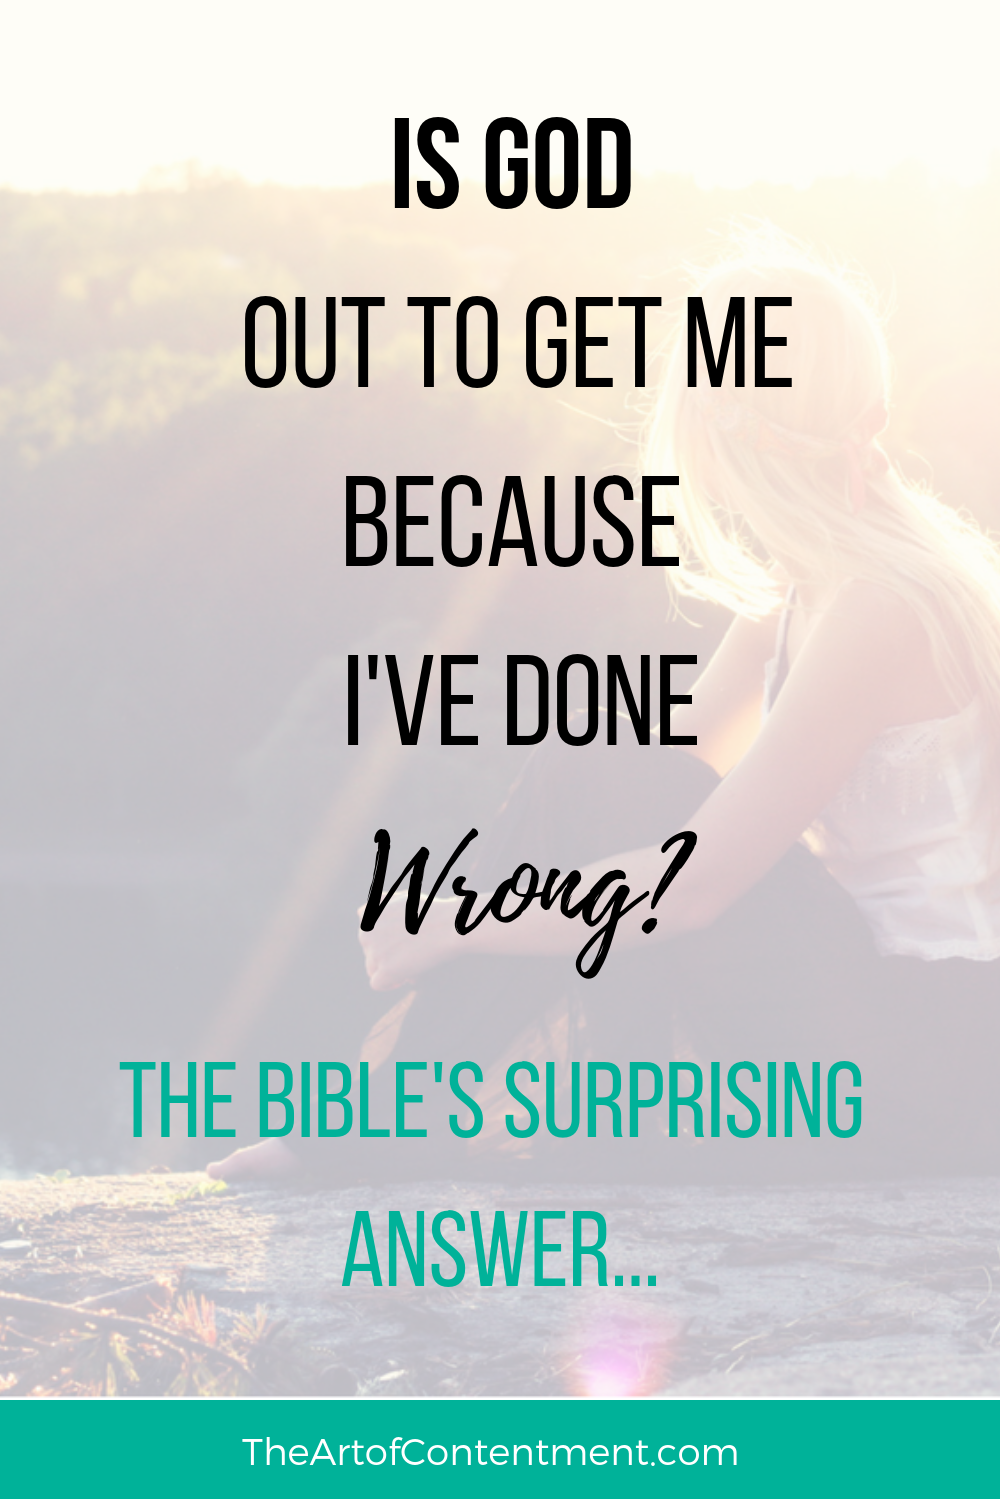 I've sinned. Is God out to get me? For the discouraged, confused, ashamed woman: The Bible's surprising answer